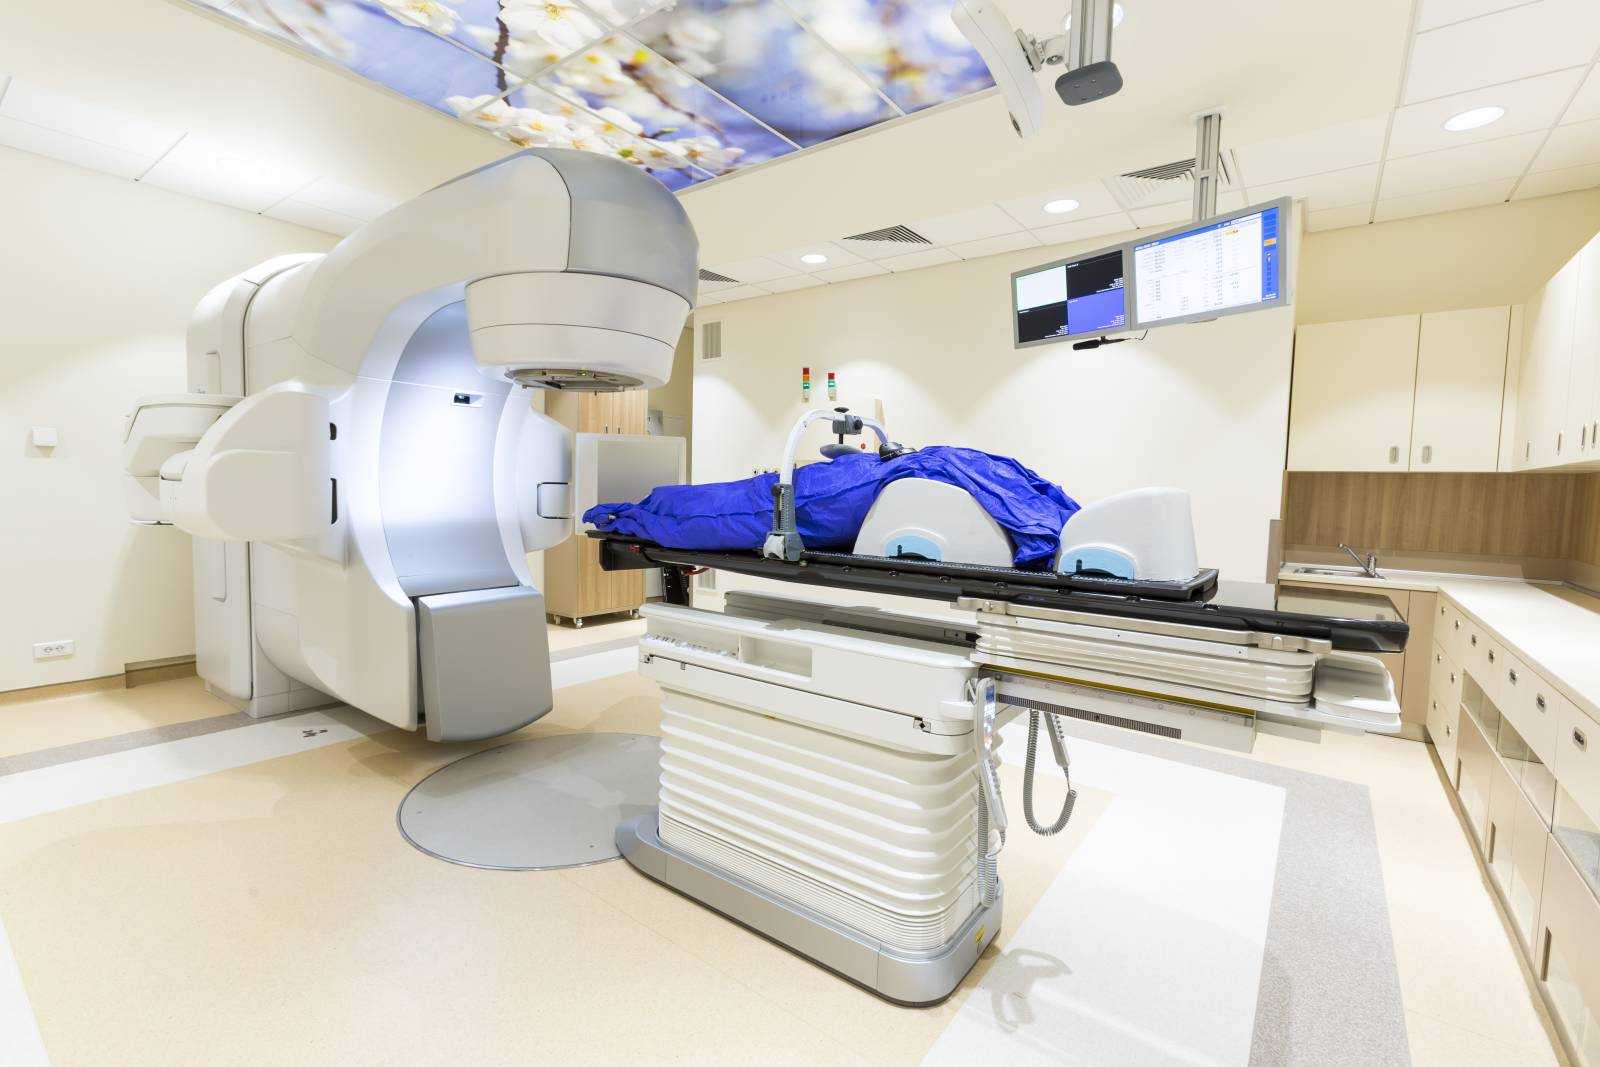 Interview with an expert: Radiation therapy update